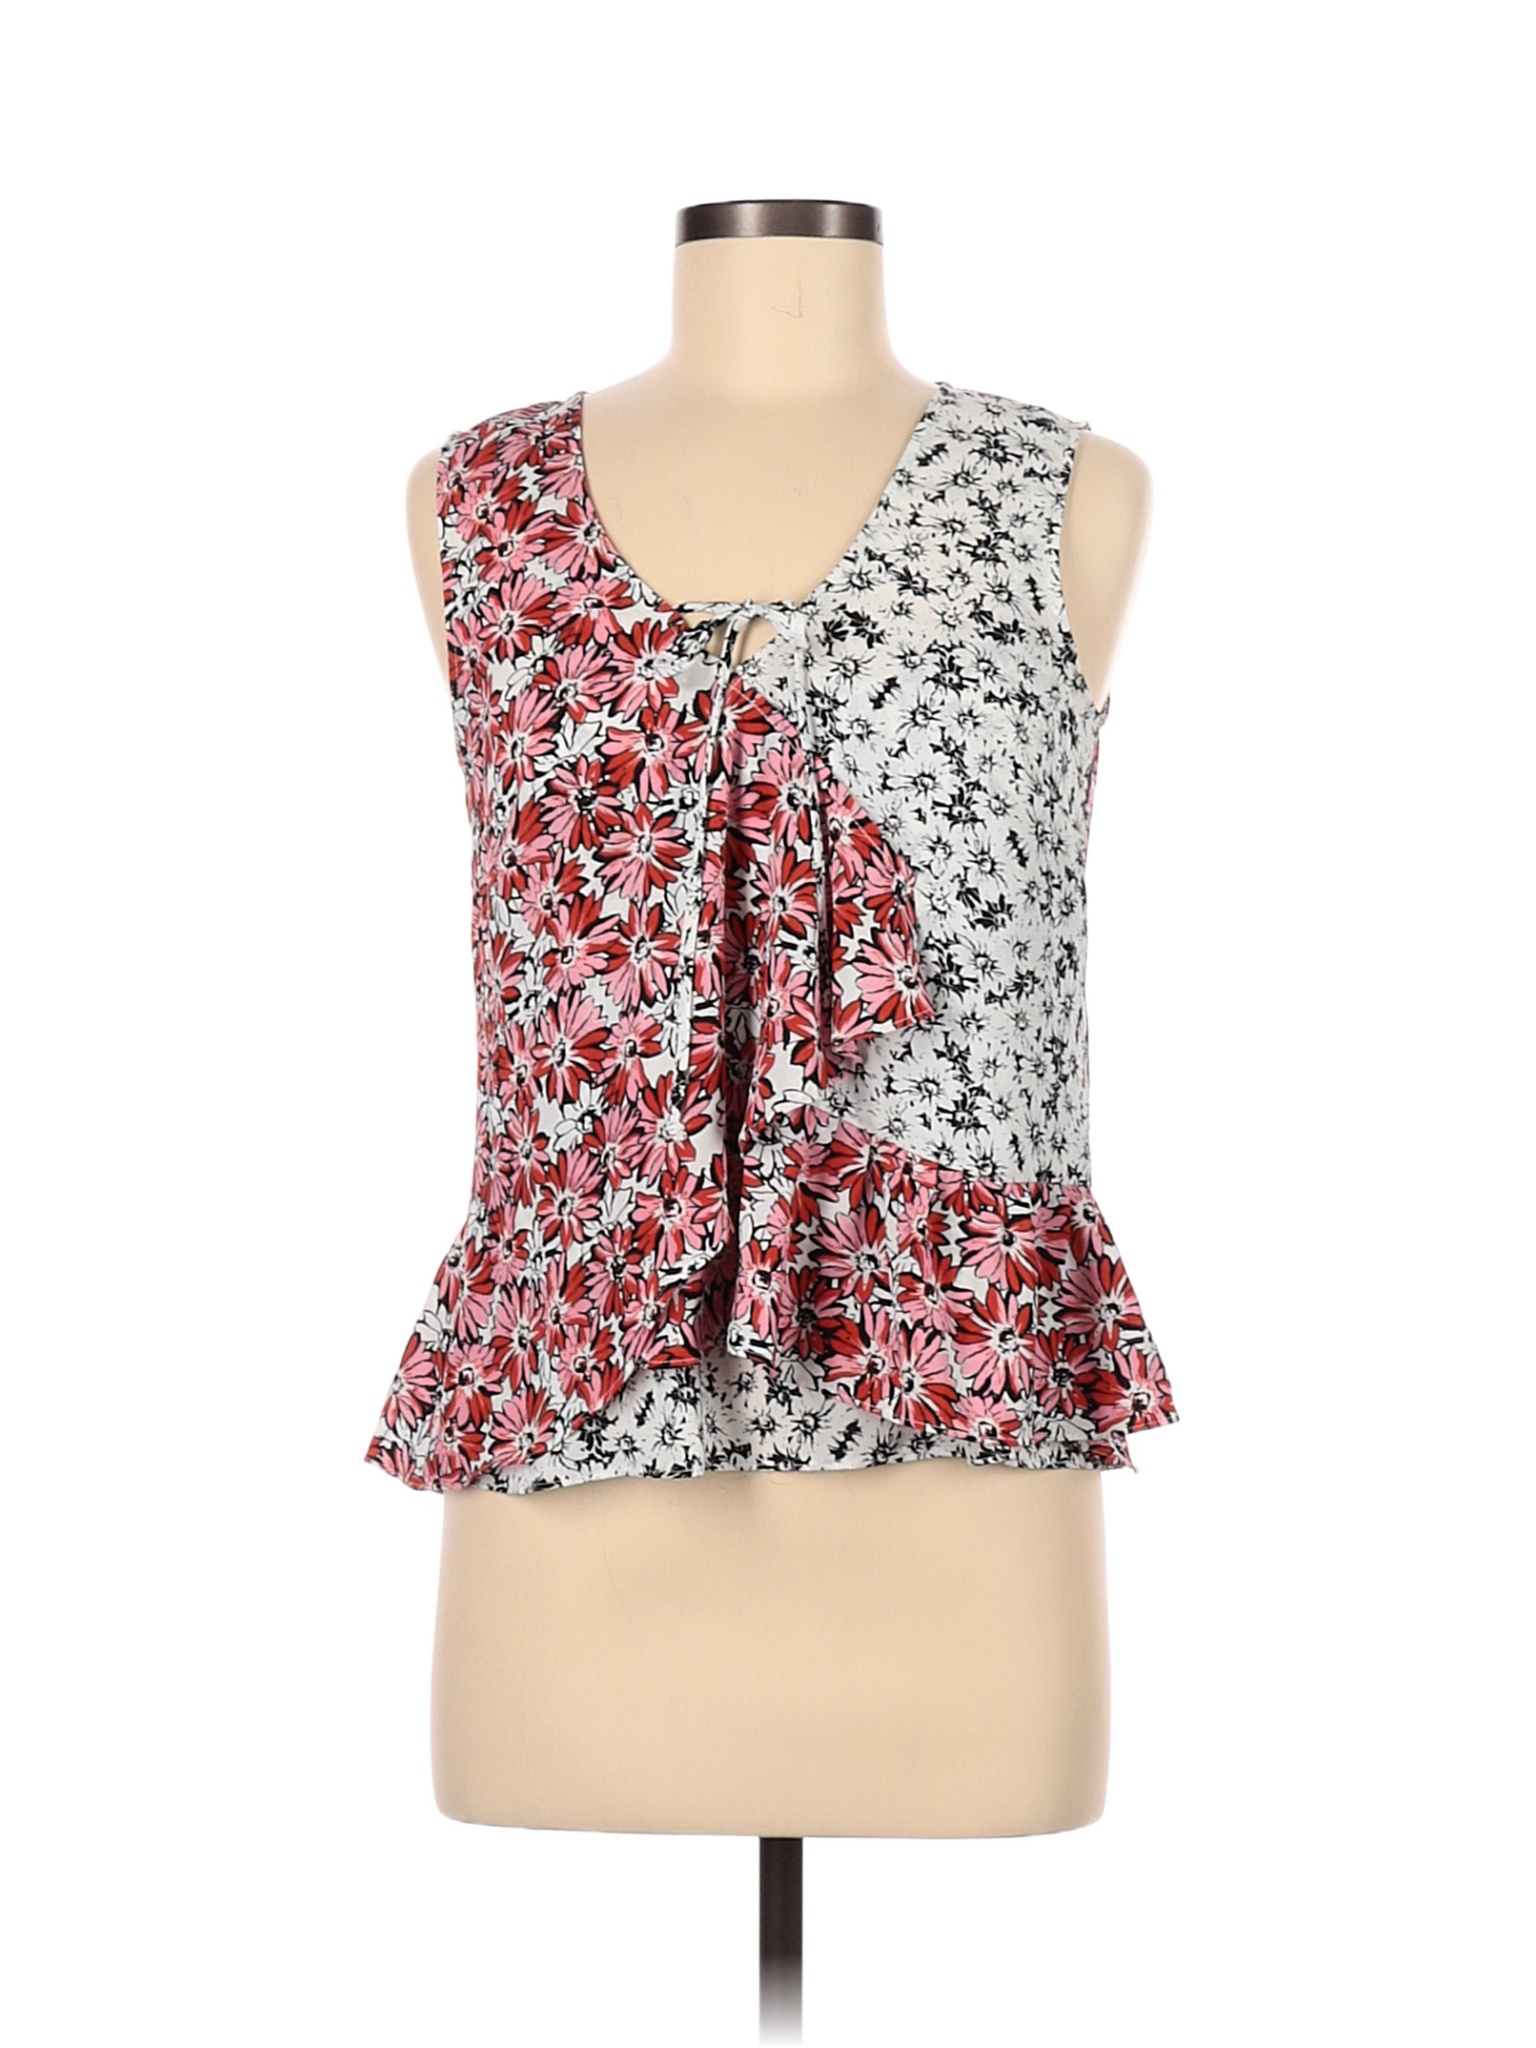 CAbi 100% Polyester Floral White Pink Sleeveless Blouse Size S - 69% ...